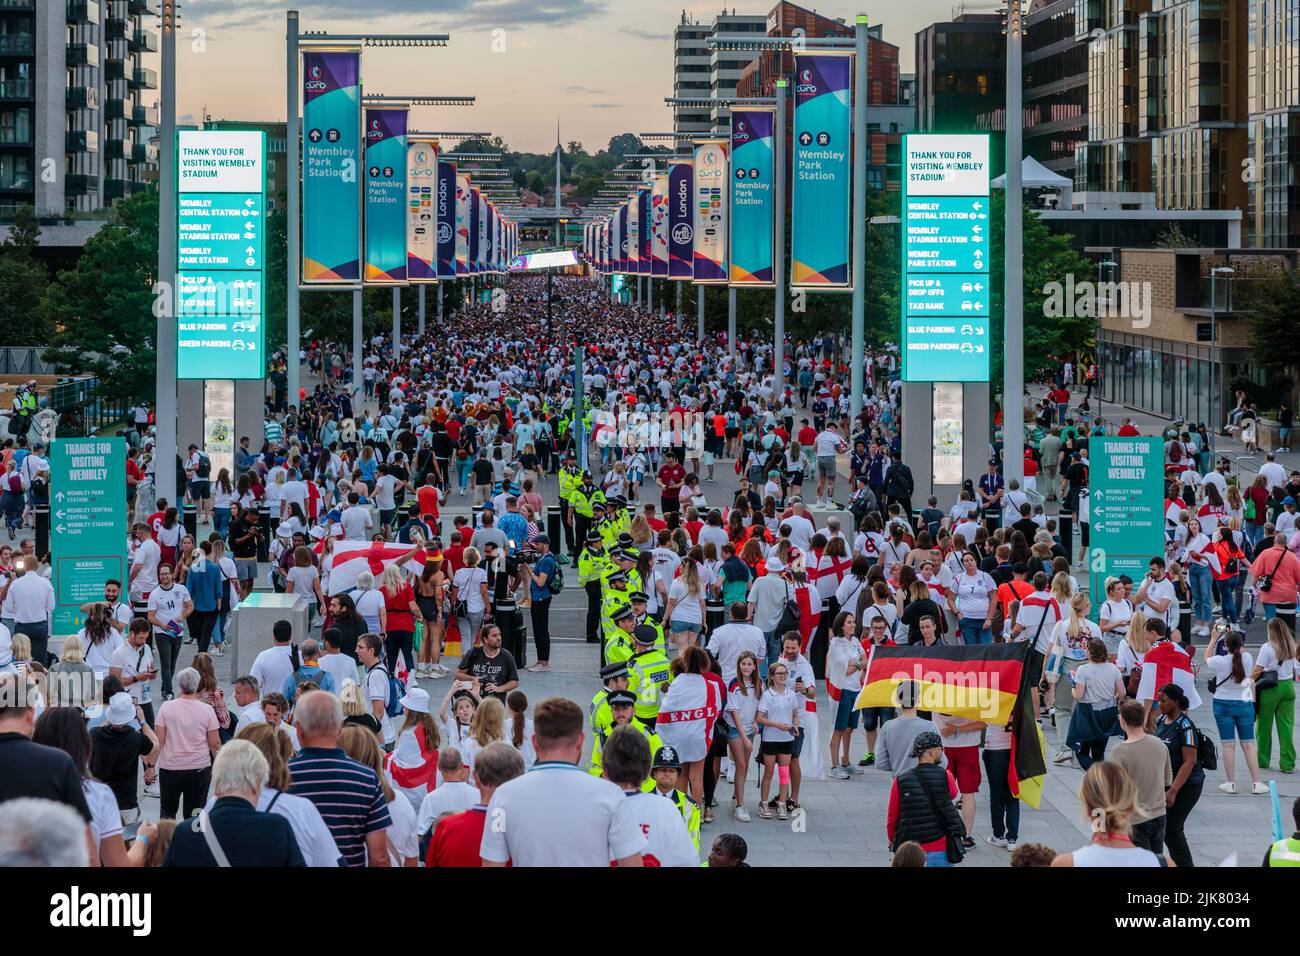 Wembley Stadium, London,UK. 31st July 2022.Atmosphere outside Wembley Stadium following England's Lionesses history victory over Germany in the Women's UEFA Euro Final. Amanda Rose/Alamy Live News Stock Photo